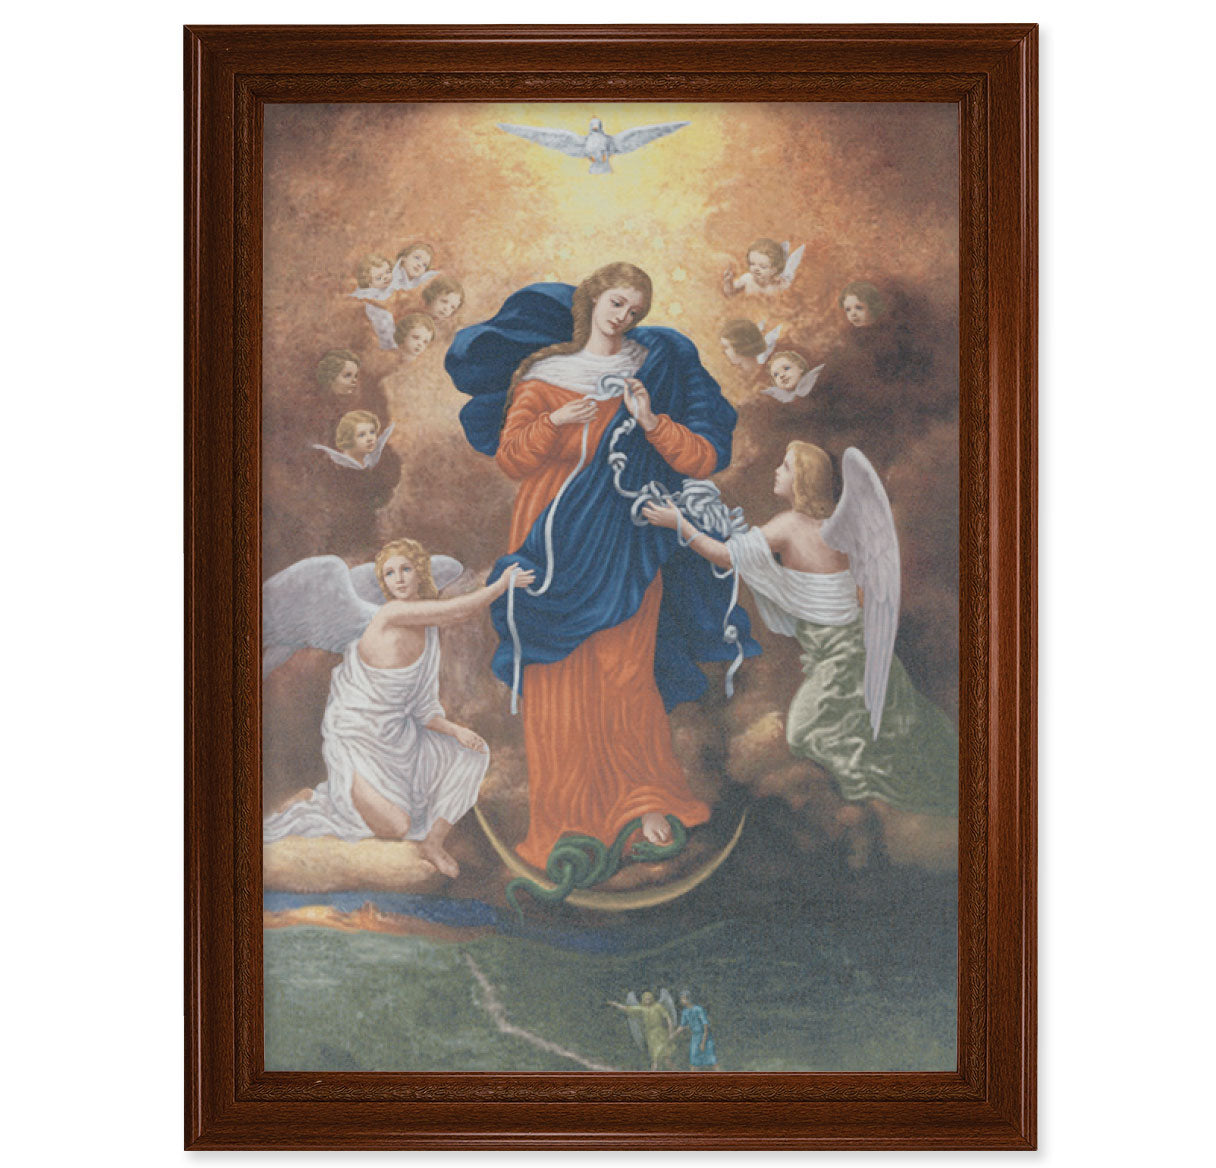 Our Lady Untier of Knots Walnut Finish Framed Canvas Art